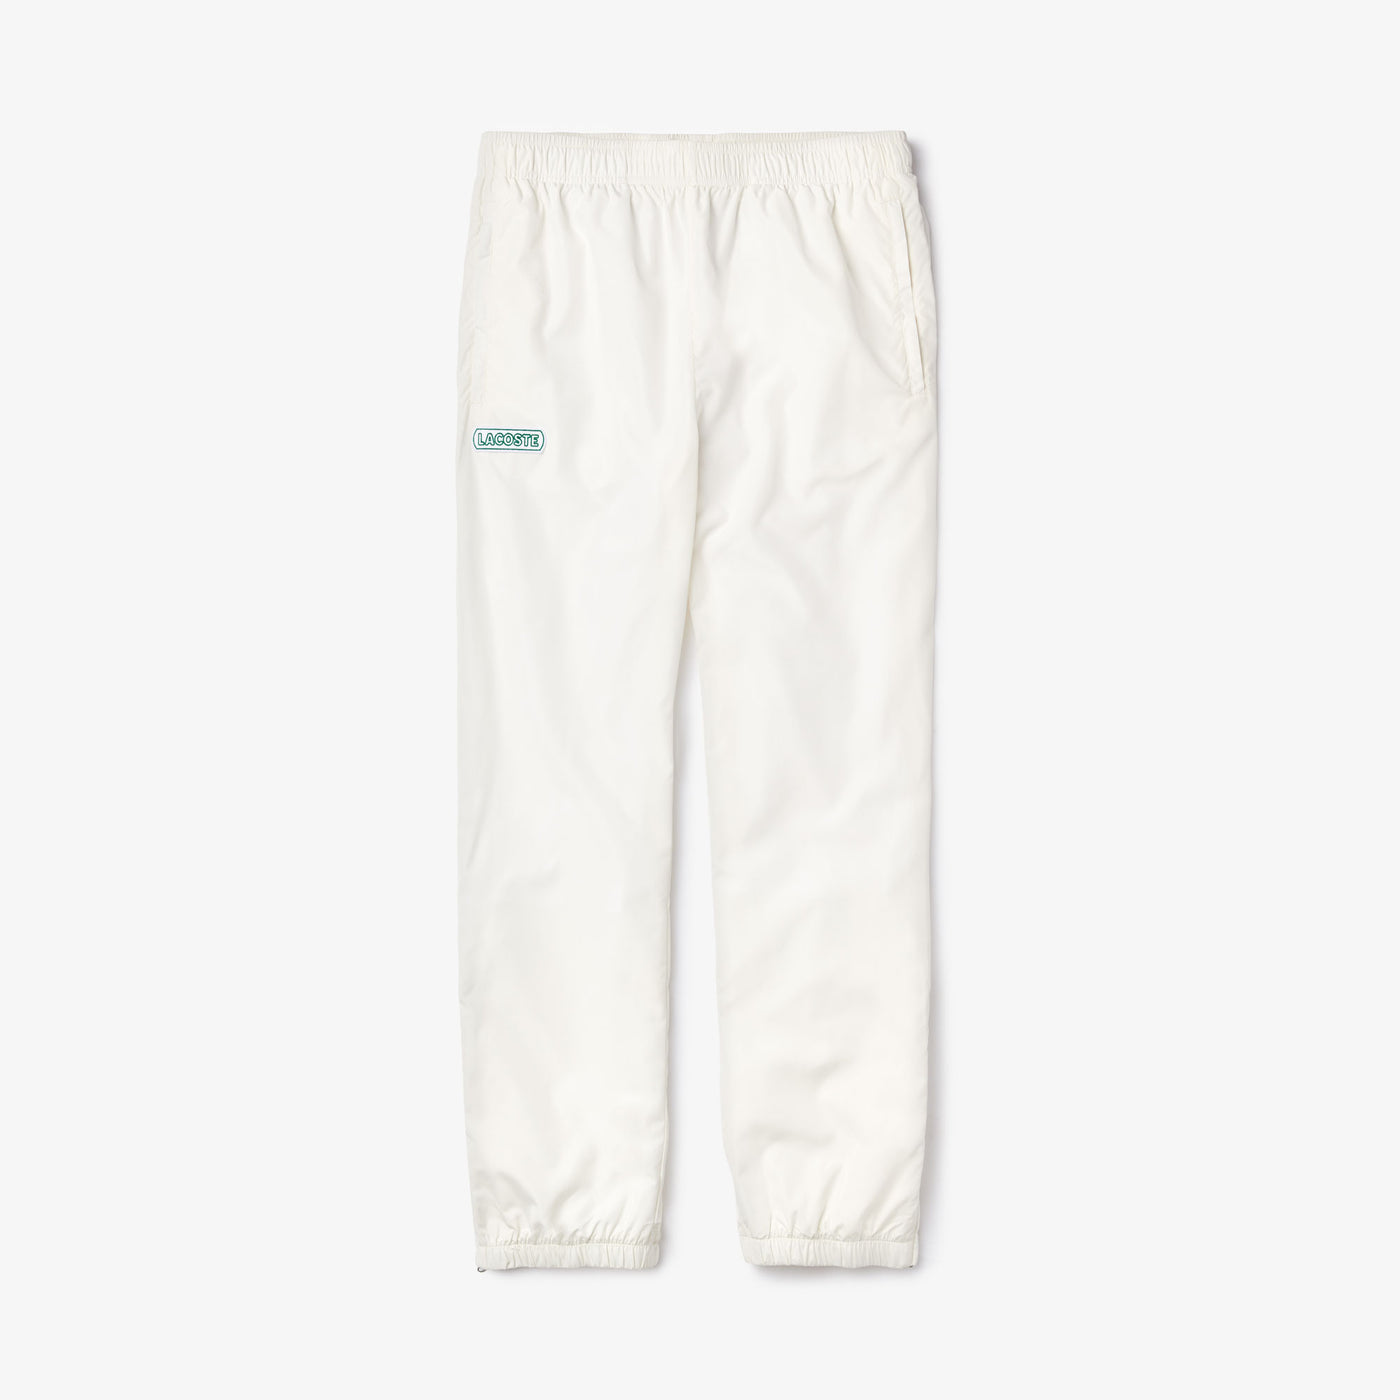 Shop The Latest Collection Of Outlet - Lacoste Mens Elastic Waistband Trackpants - Hh5701 In Lebanon